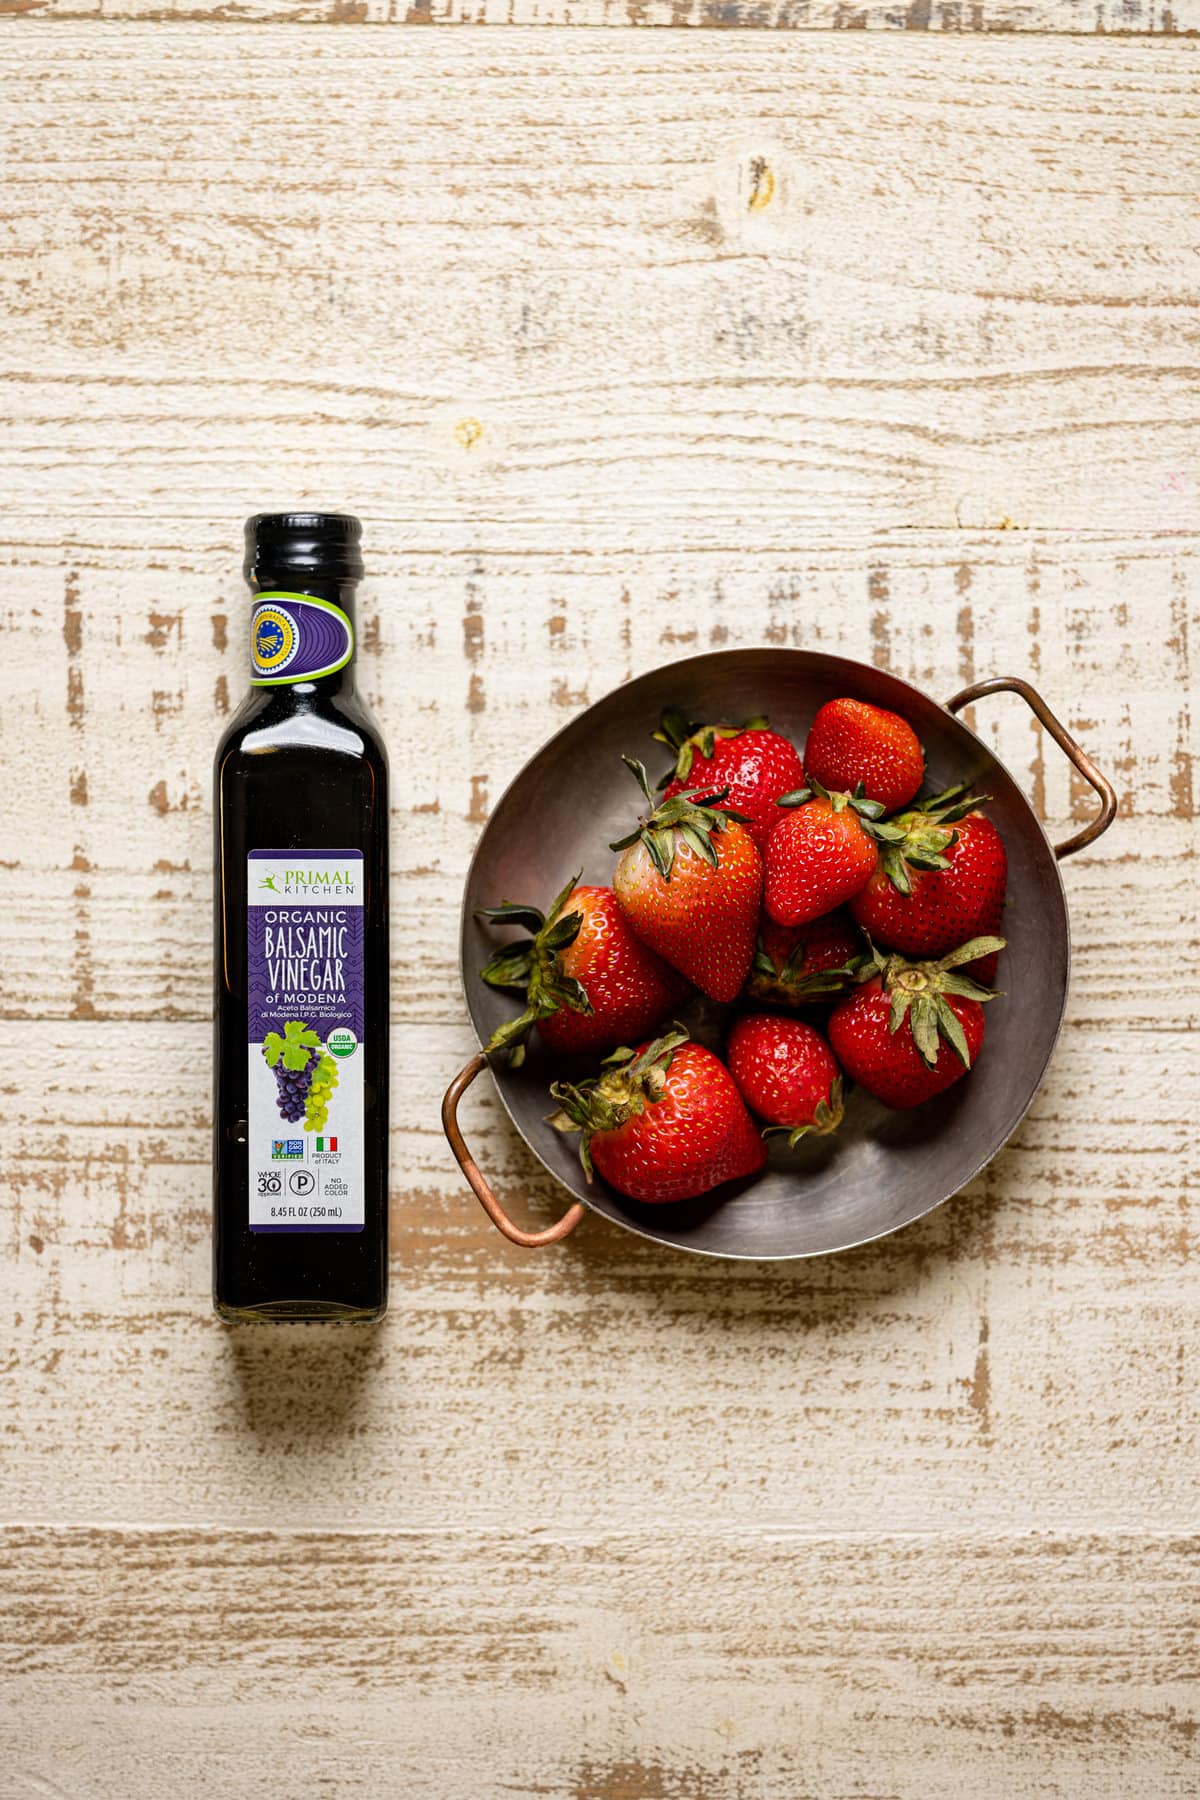 Container of strawberries next to a bottle of balsamic vinegar